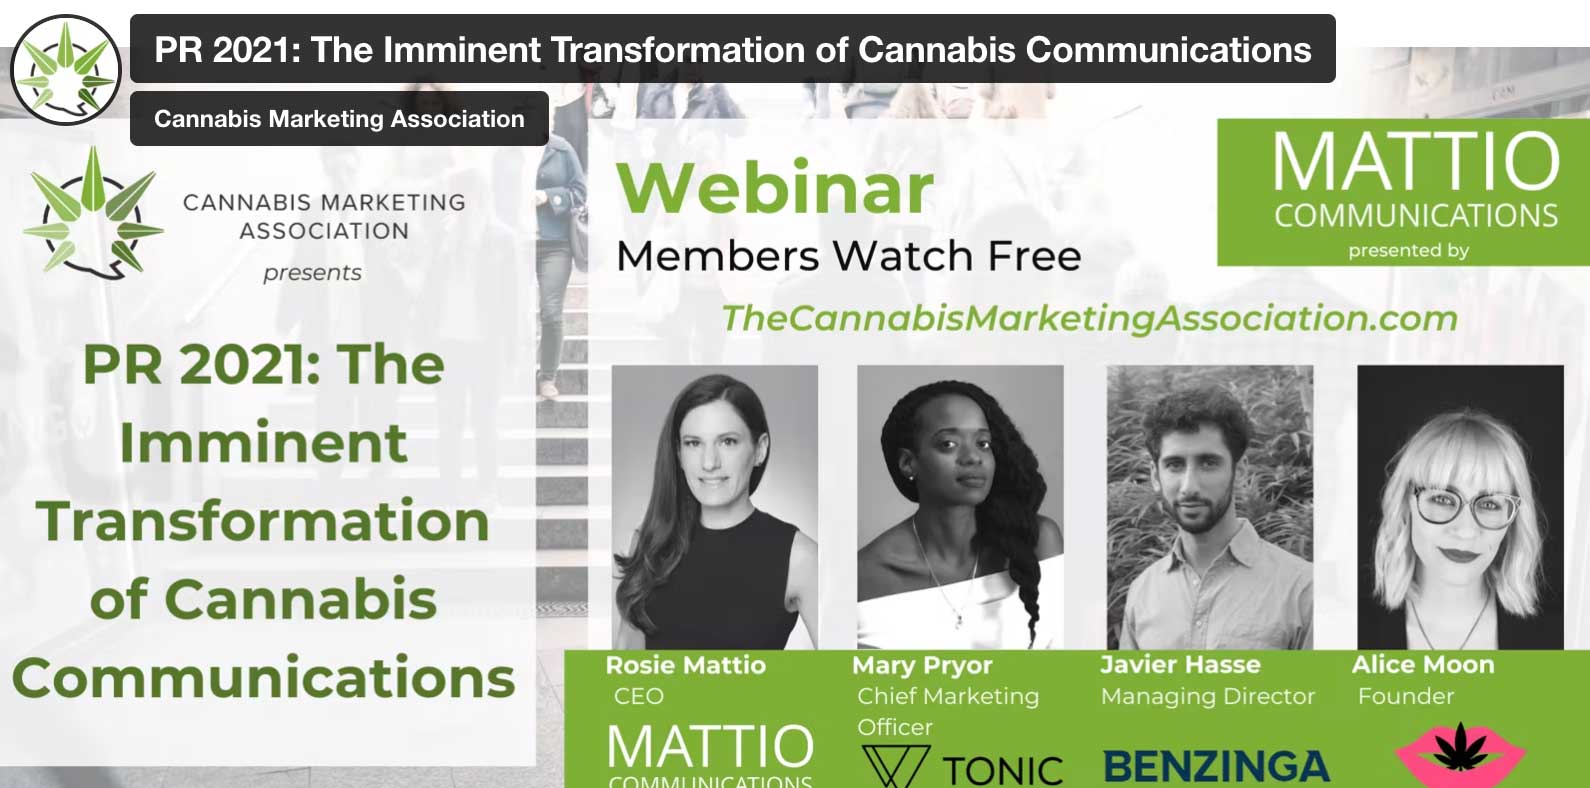 CMA: PR 2021: The Imminent Transformation of Cannabis Communications